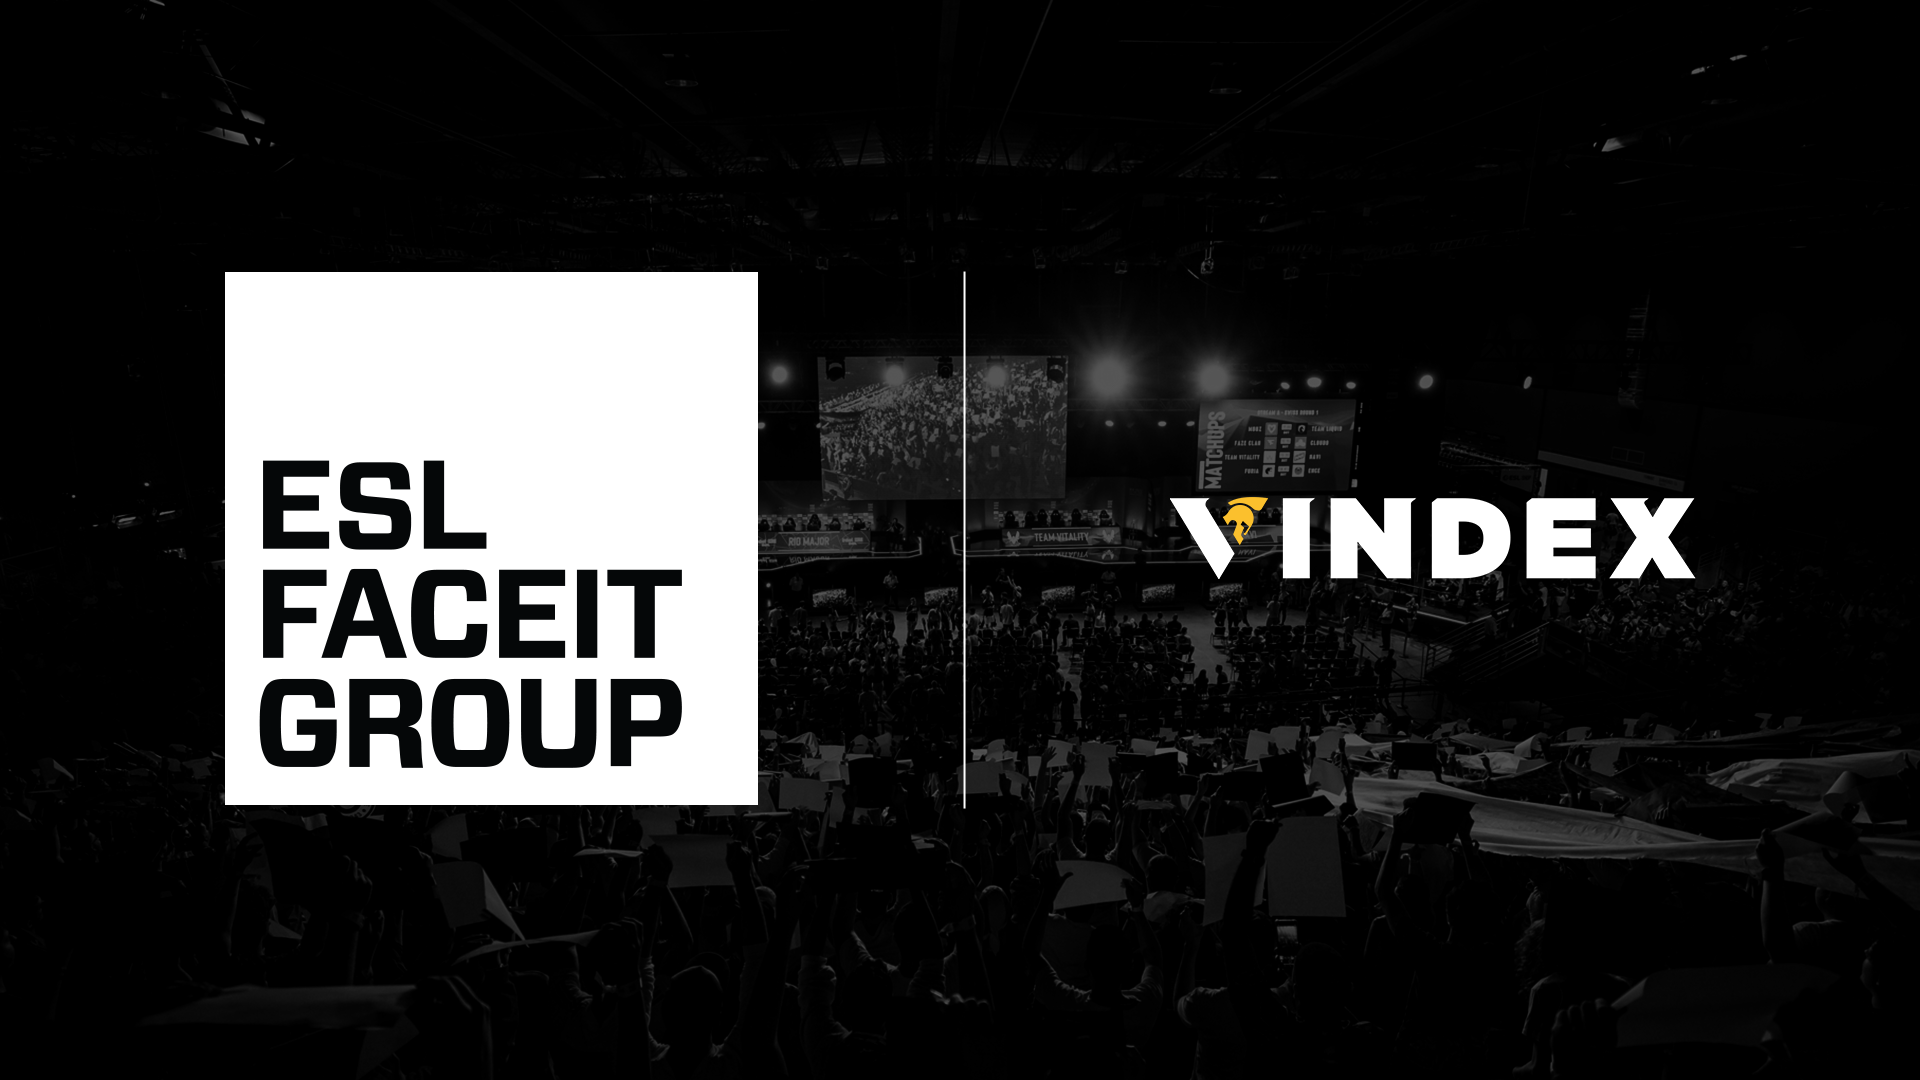 The ESL FACEIT group strengthens itself as a world leader in esports entertainment